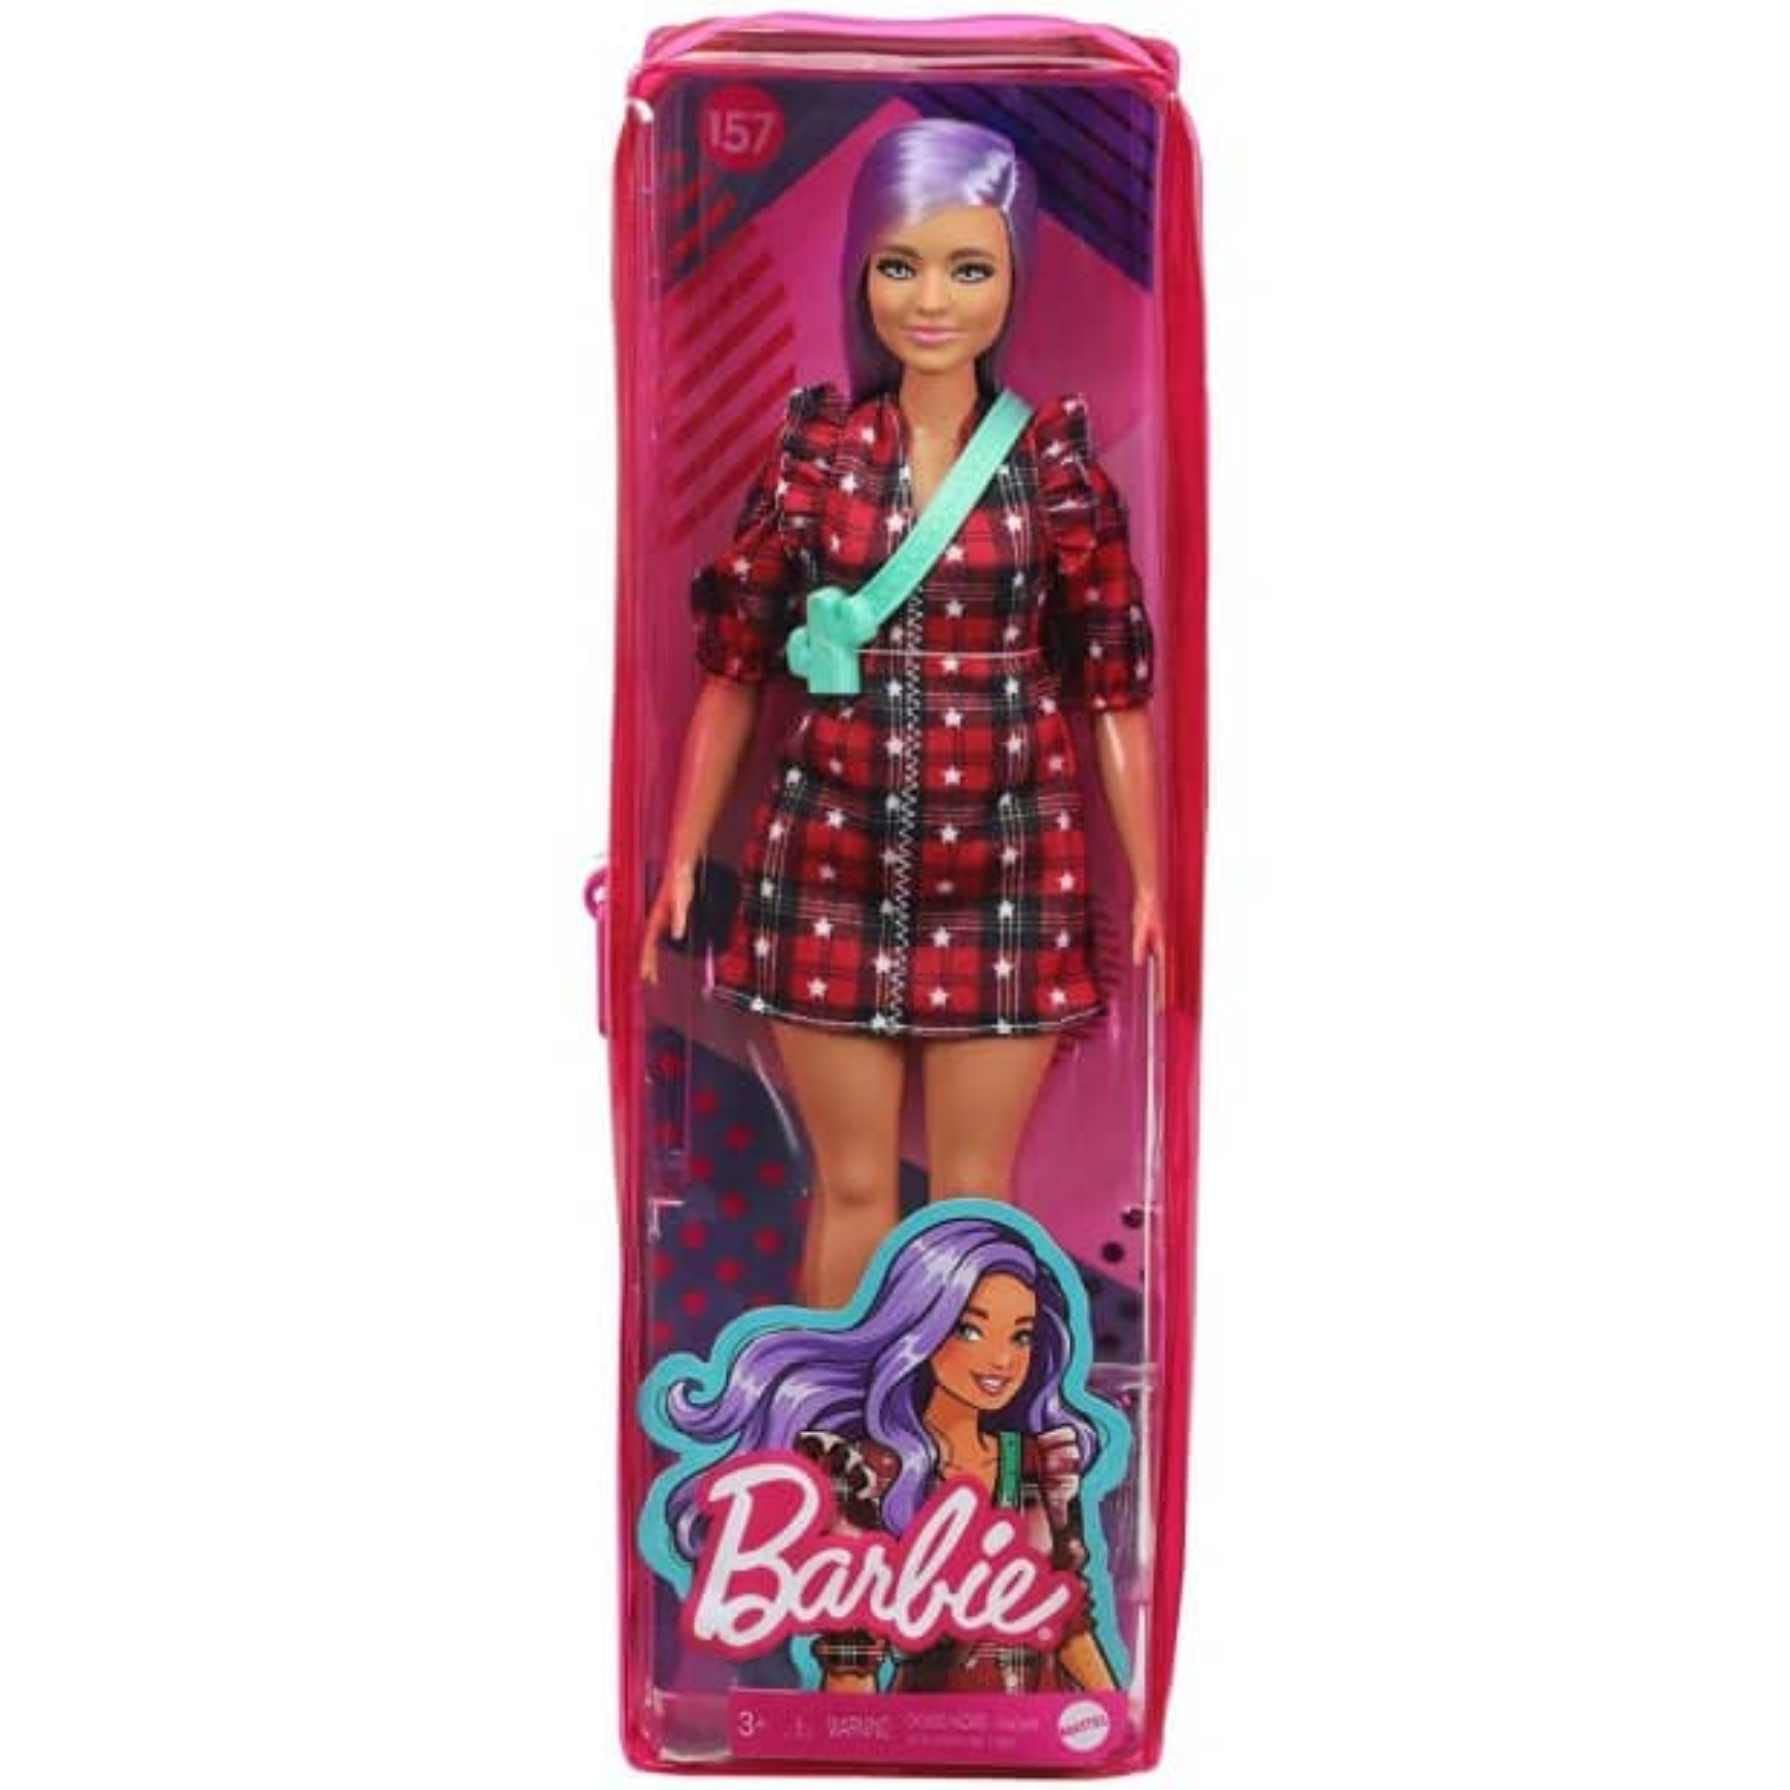 Barbie Fashionistas Doll #157, Curvy with Lavender Hair Wearing Red Plaid Dress, White Cowboy Boots & Teal Cross-Body Cactus Bag, Toy for Kids 3 to 8 Years Old